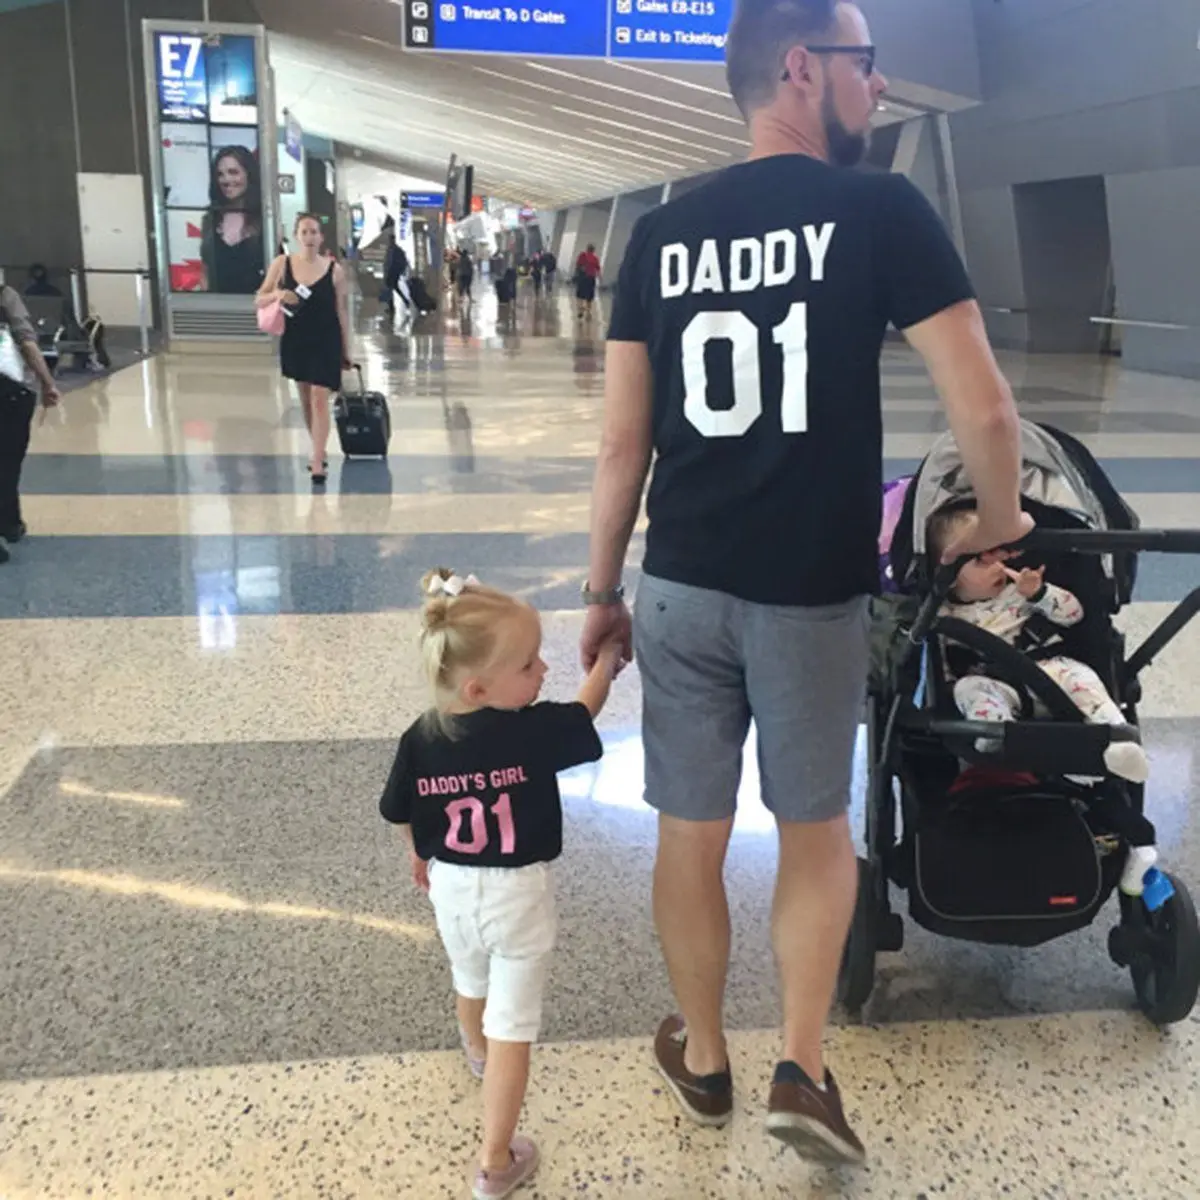 Daddy daddy's girl father daughter matching T-shirts Fathers Day Gift Family Daddy daddy's girl father daughter matching shirts Ropa Ropa de género neutro para adultos Tops y camisetas Camisetas 